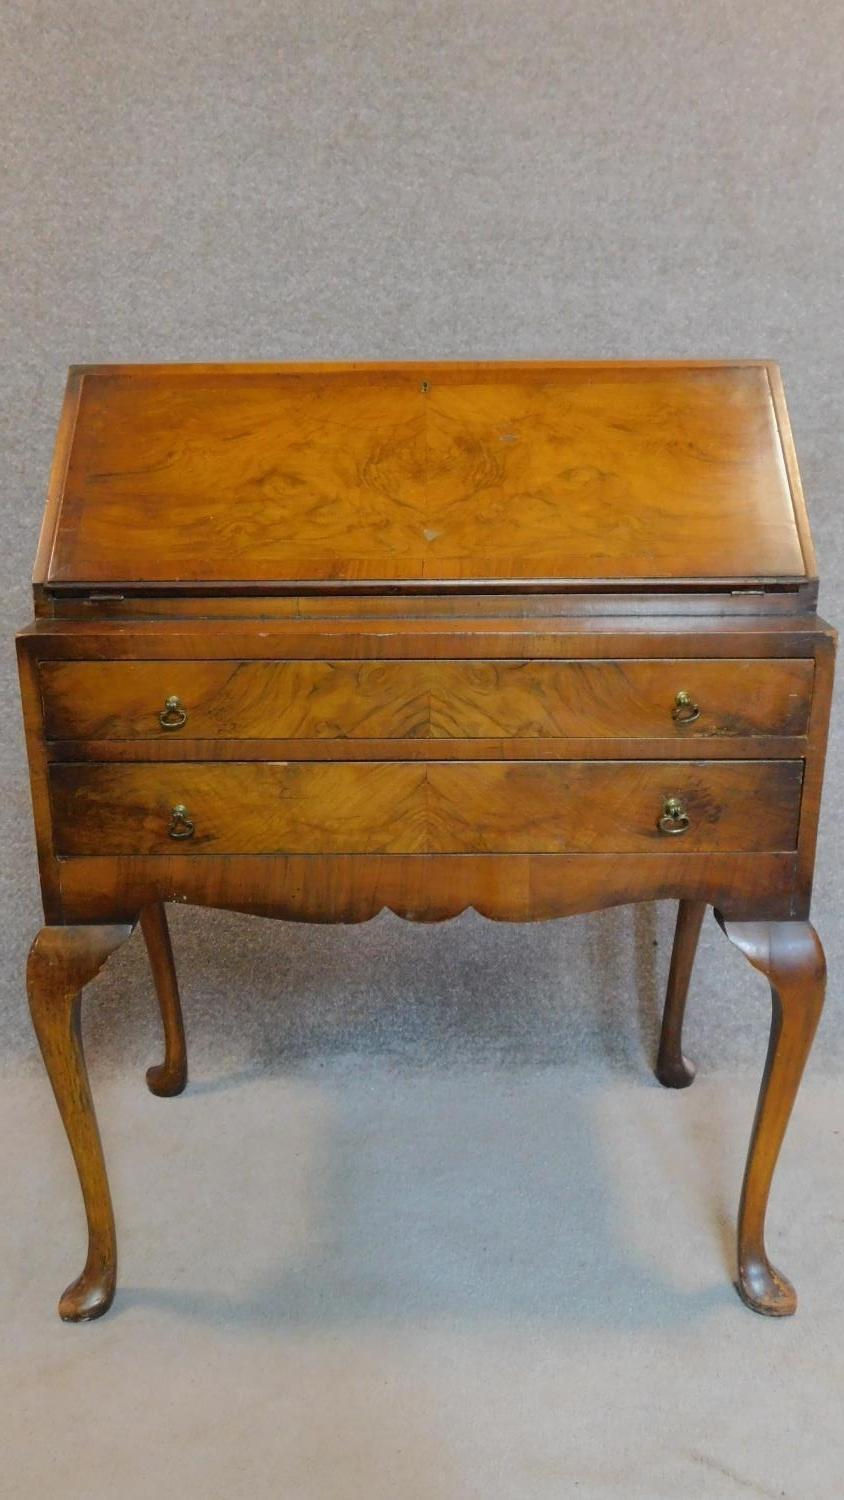 A mid Georgian style burr walnut bureau with fall front enclosing a fitted interior on cabriole